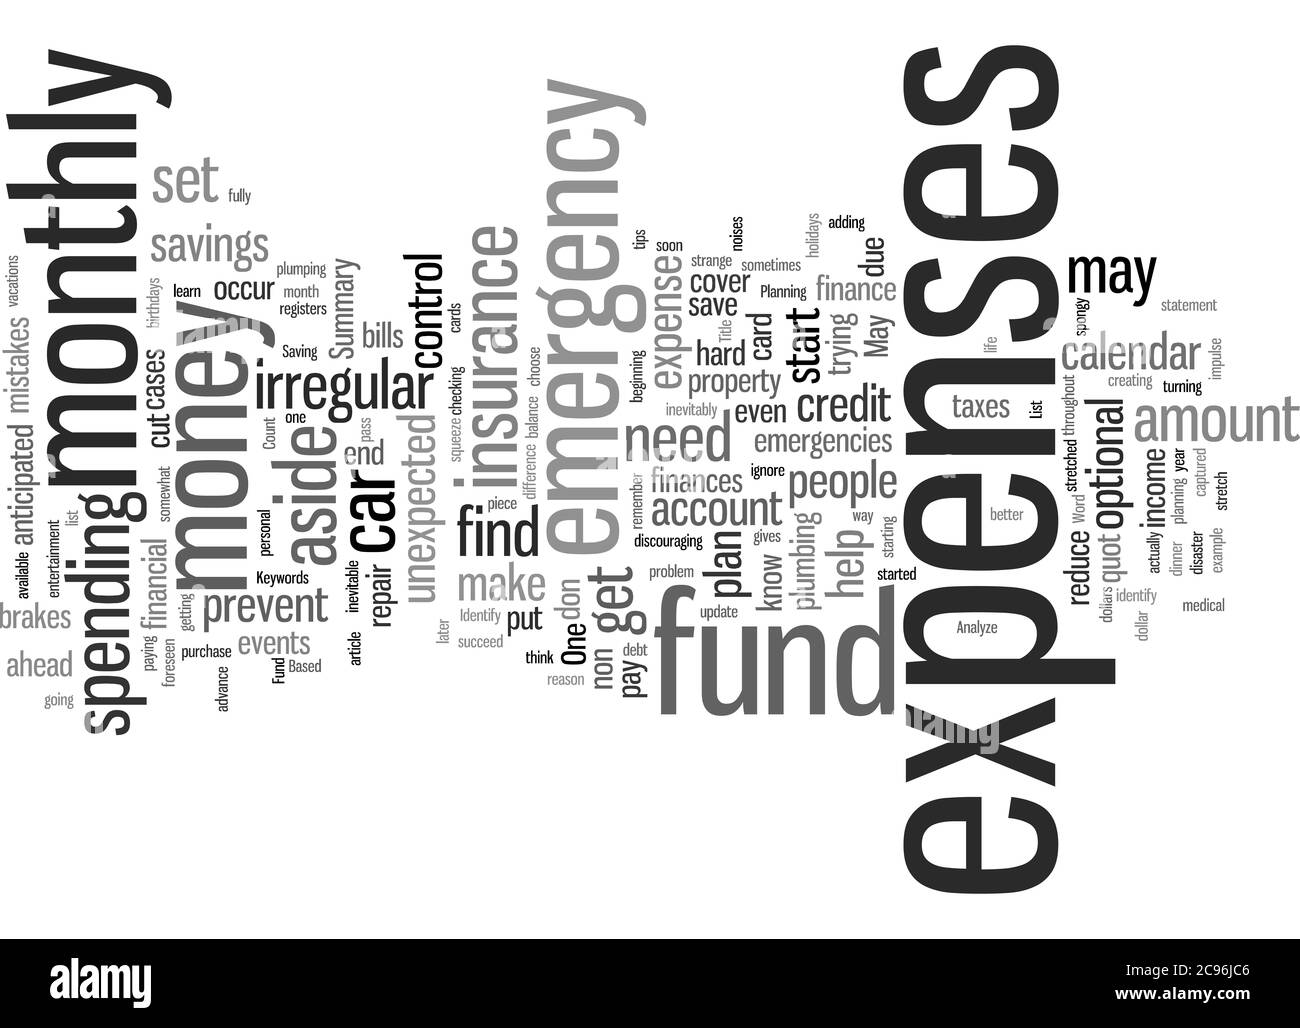 Word Cloud Summary of How To Create Your Own Emergency Fund Article Stock Photo